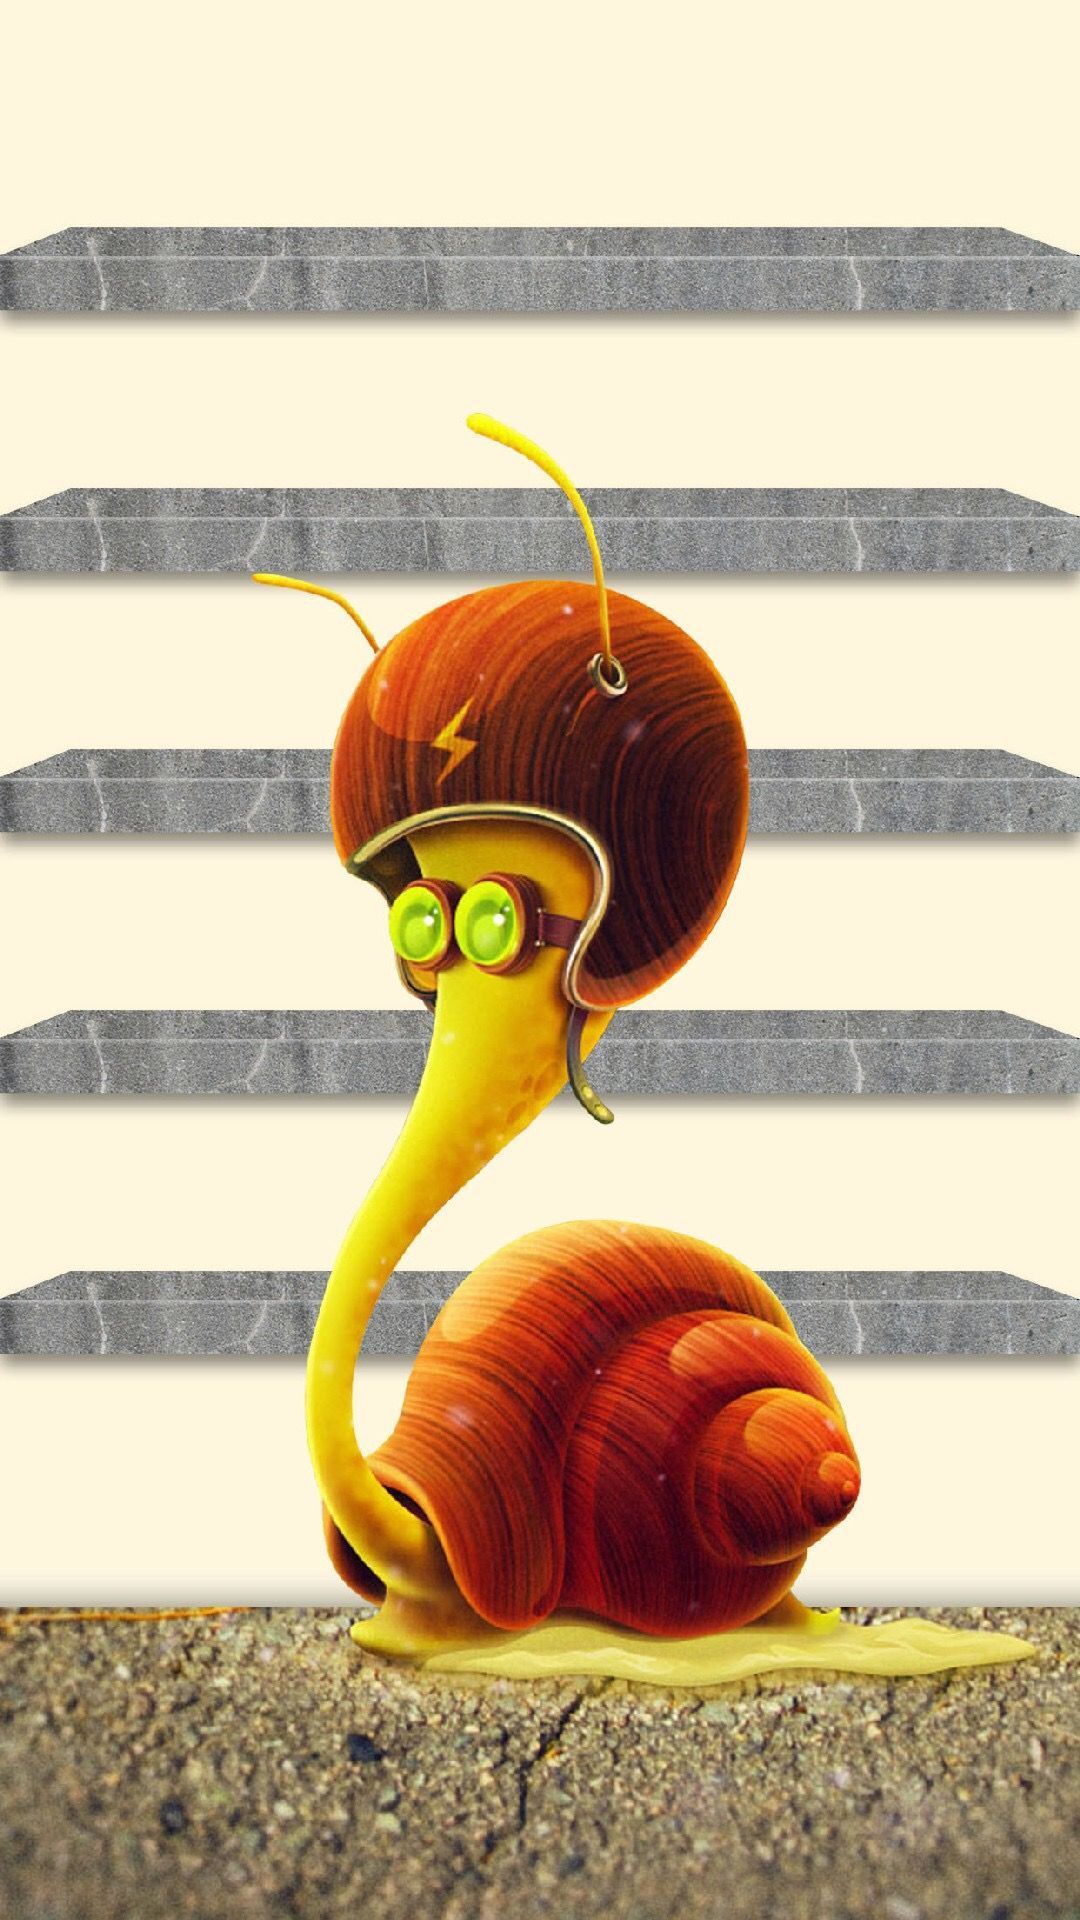 ↑↑TAP AND GET THE FREE APP! Shelves Funny Snail in Helmet Yellow LOL Cute Art Illustration Speed Fast Slow HD iPhone. iPhone 6 plus wallpaper, Wallpaper, Cute art